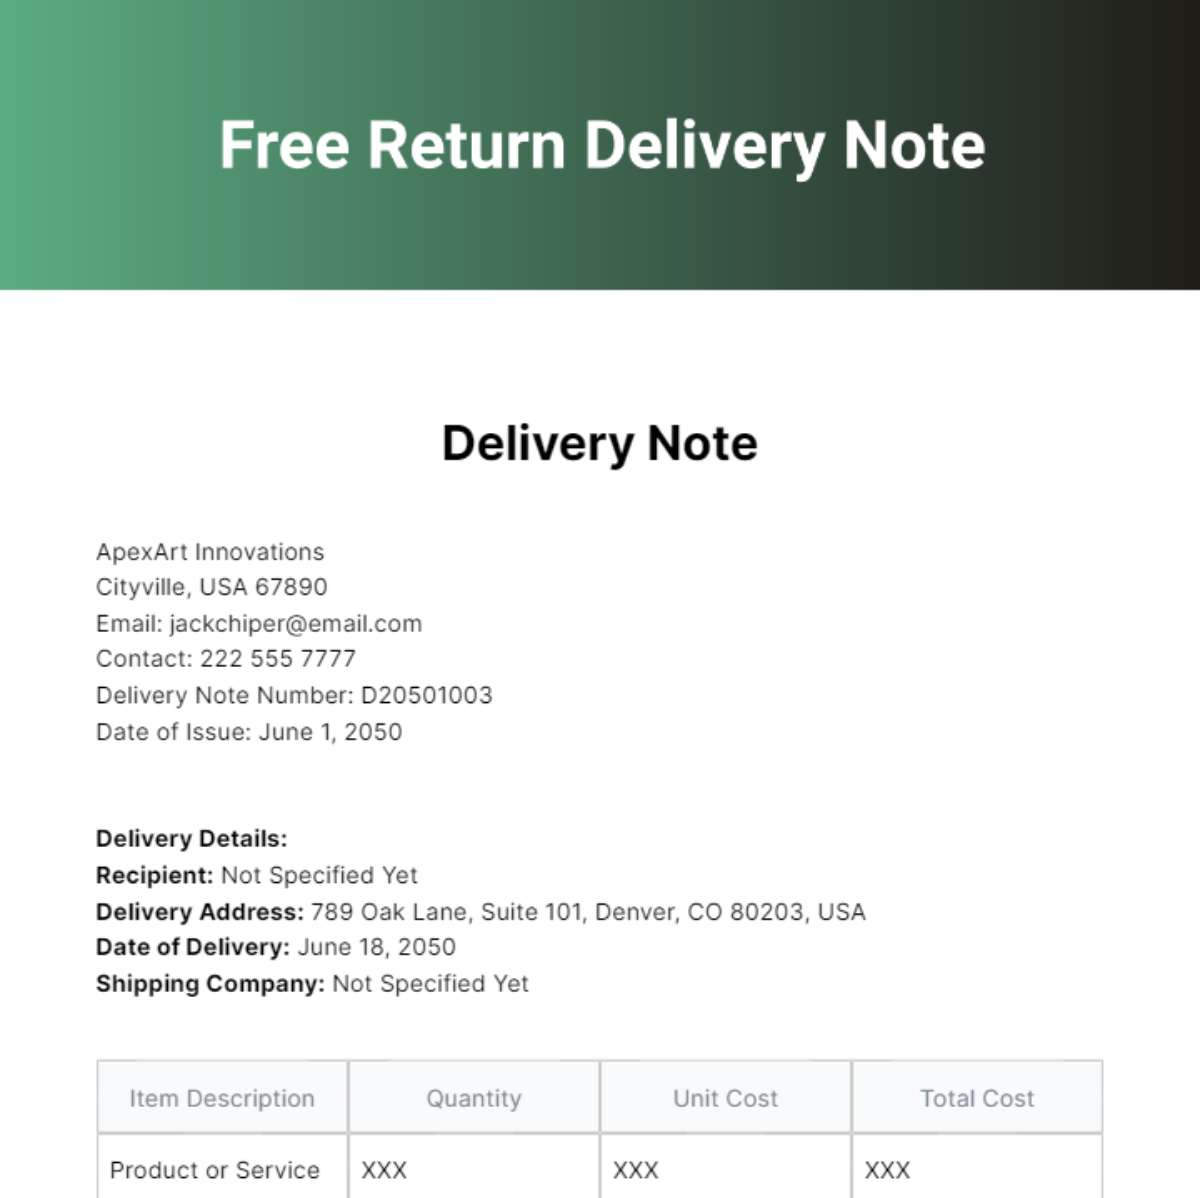 Return Delivery Note Template